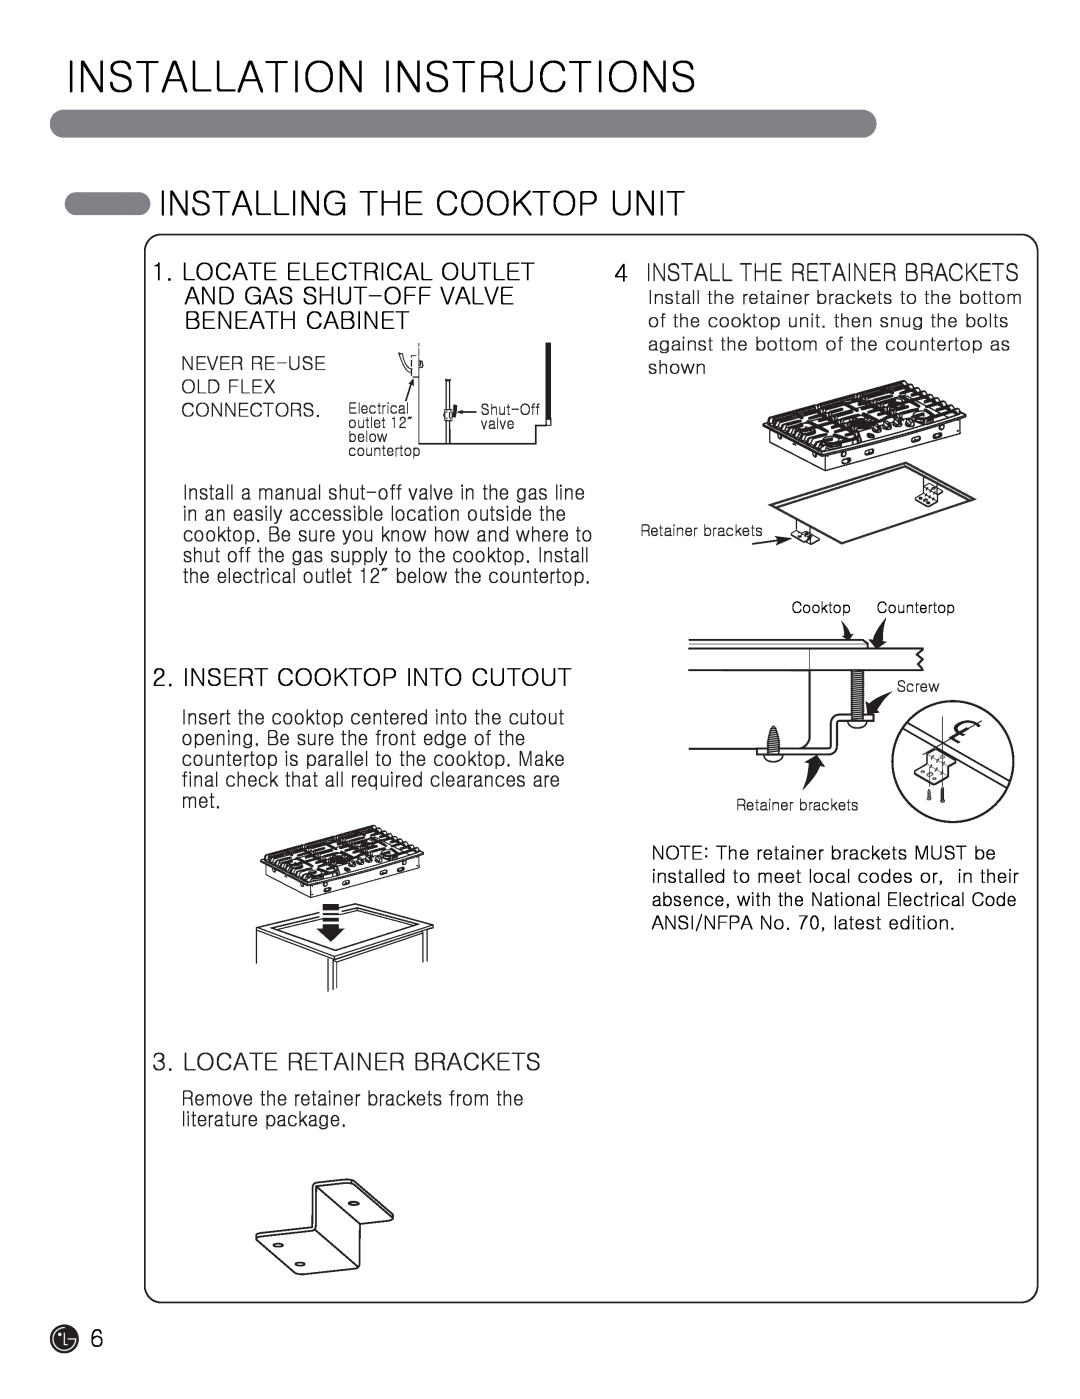 LG Electronics MFL62725501 Installing The Cooktop Unit, Locate Electrical Outlet, And Gas Shut-Off Valve, Beneath Cabinet 